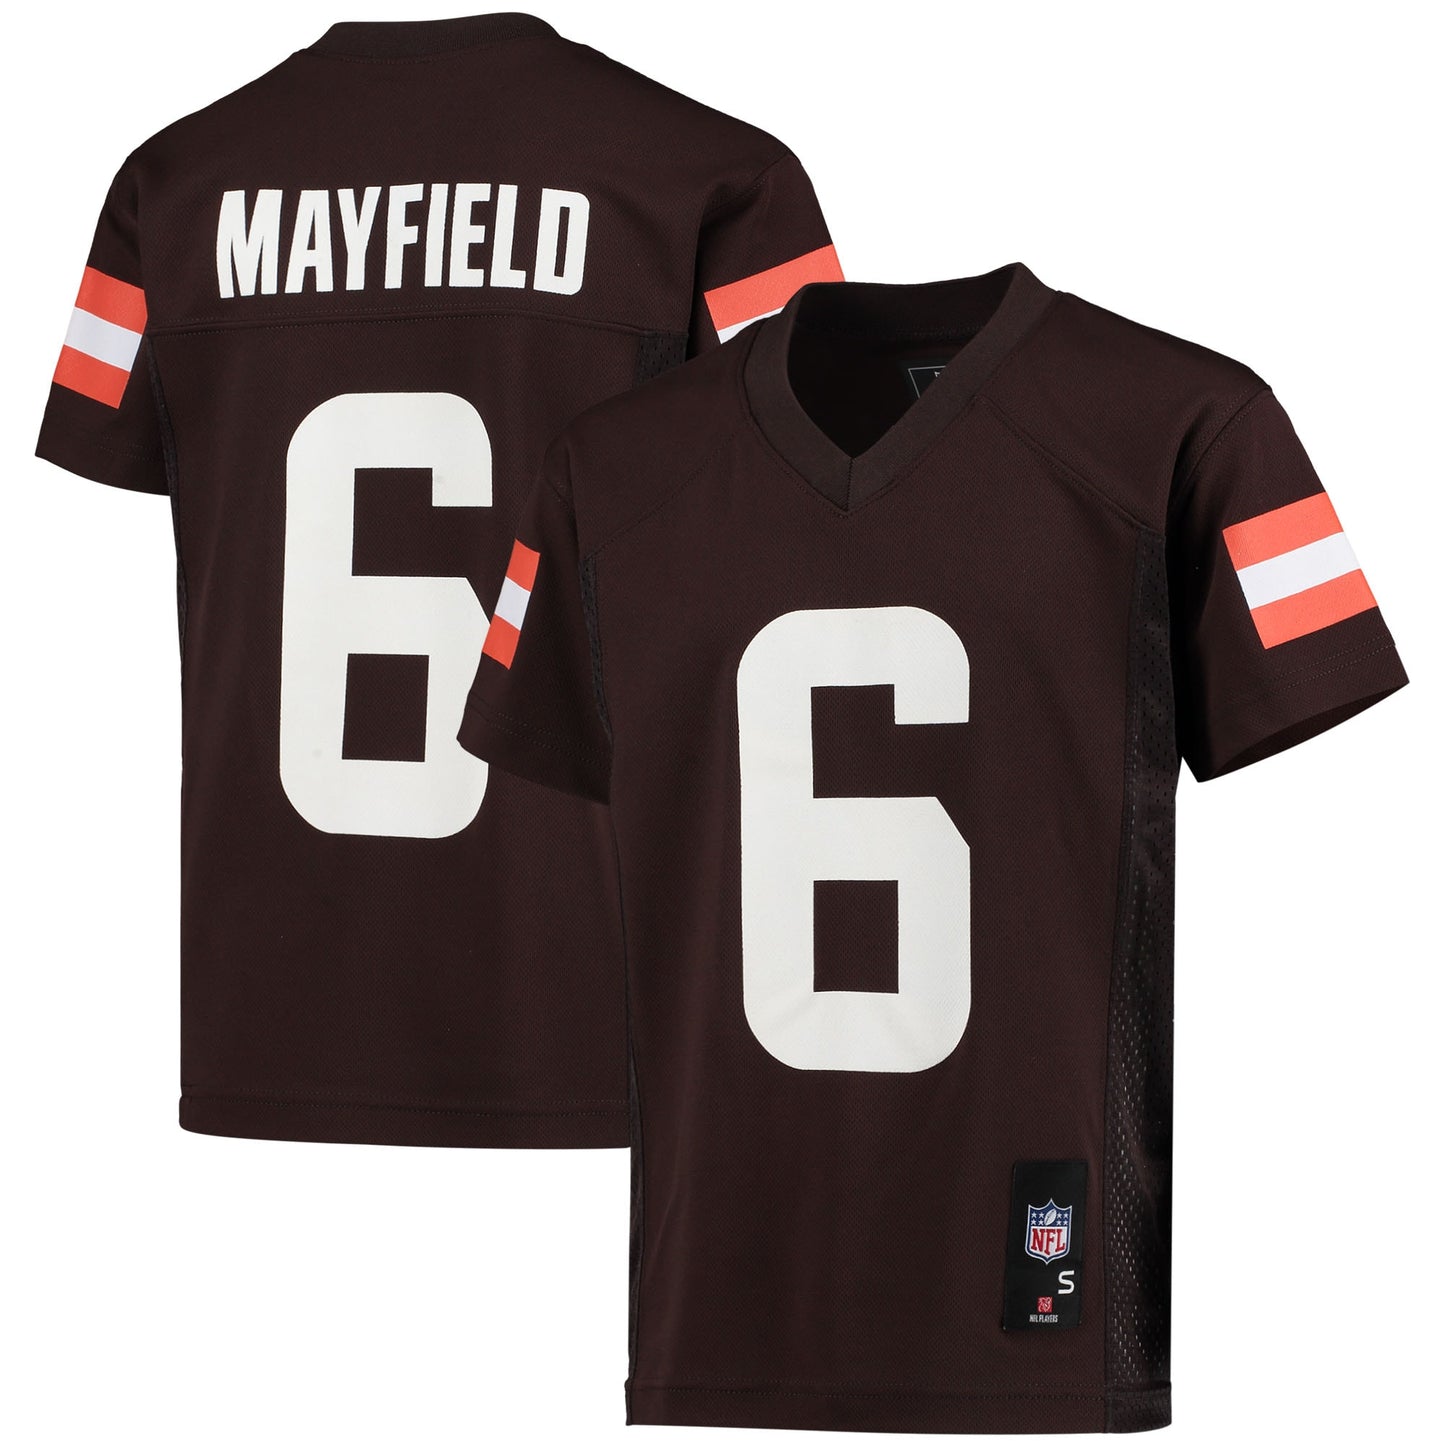 Baker Mayfield Cleveland Browns Youth Replica Player Jersey - Brown